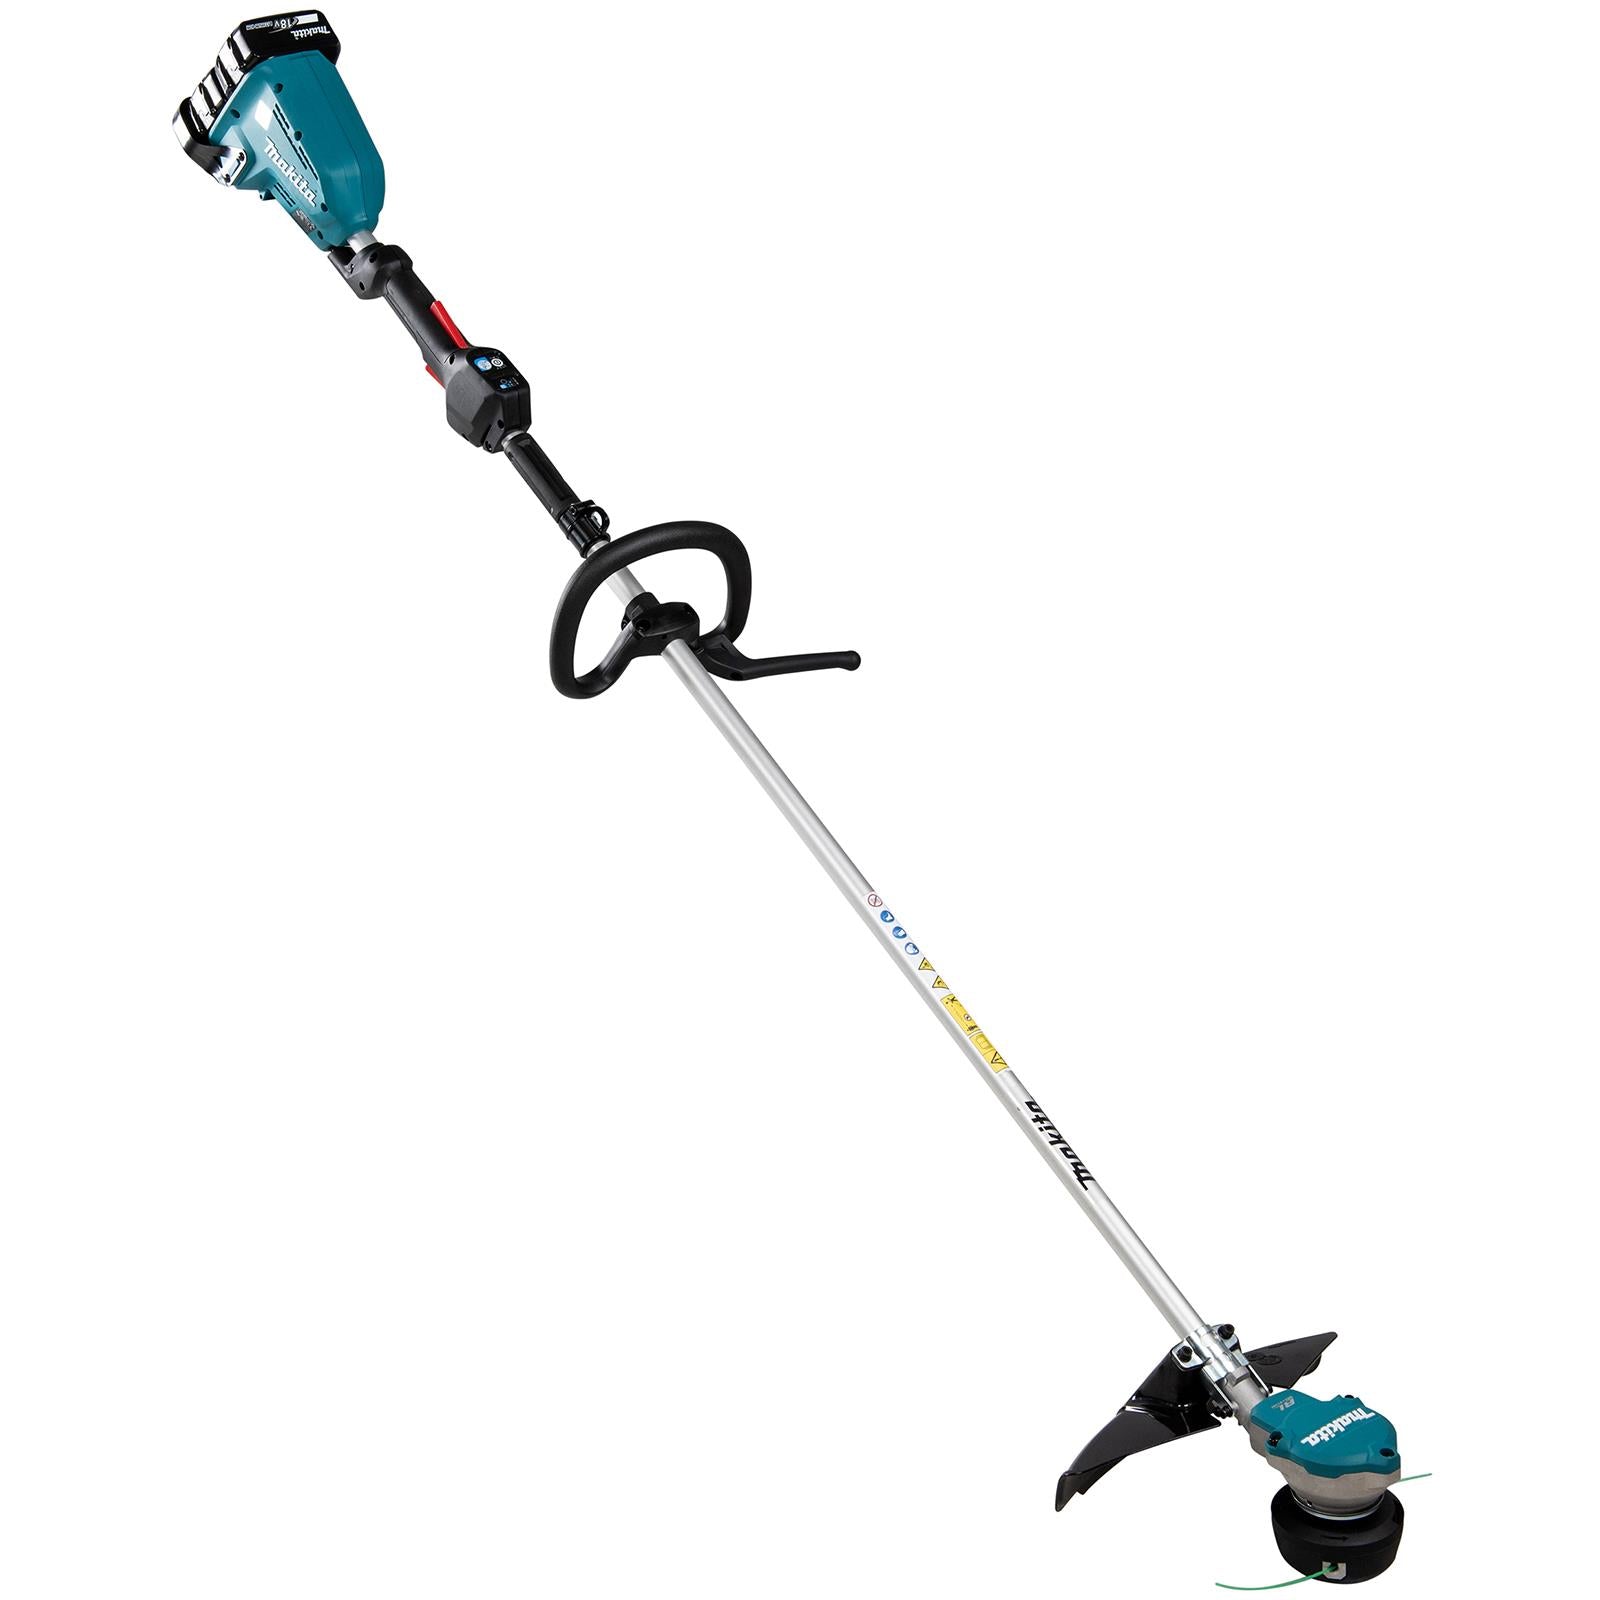 Makita Line Trimmer Strimmer Kit 2 x 18V LXT Brushless Cordless Garden Lawn Strimming 2 x 6Ah Battery and Dual Rapid Charger DUR368APG2